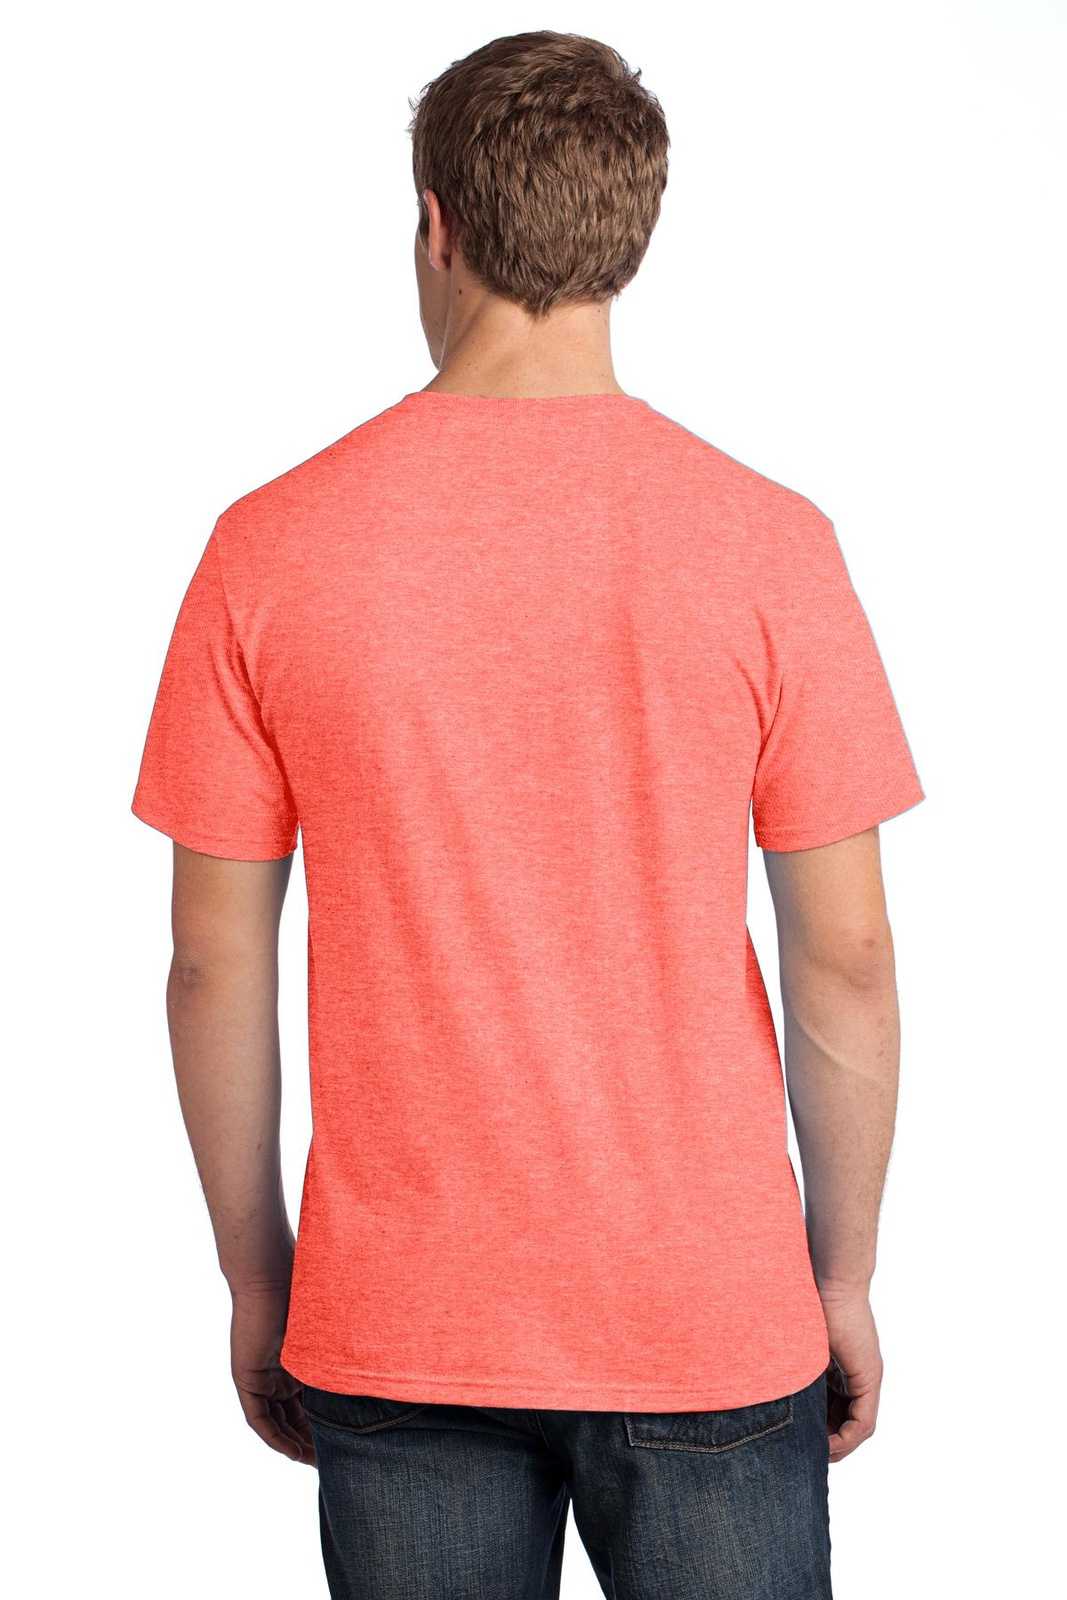 Fruit of the Loom 3930 HD Cotton 100% Cotton T-Shirt - Retro Heather Coral - HIT a Double